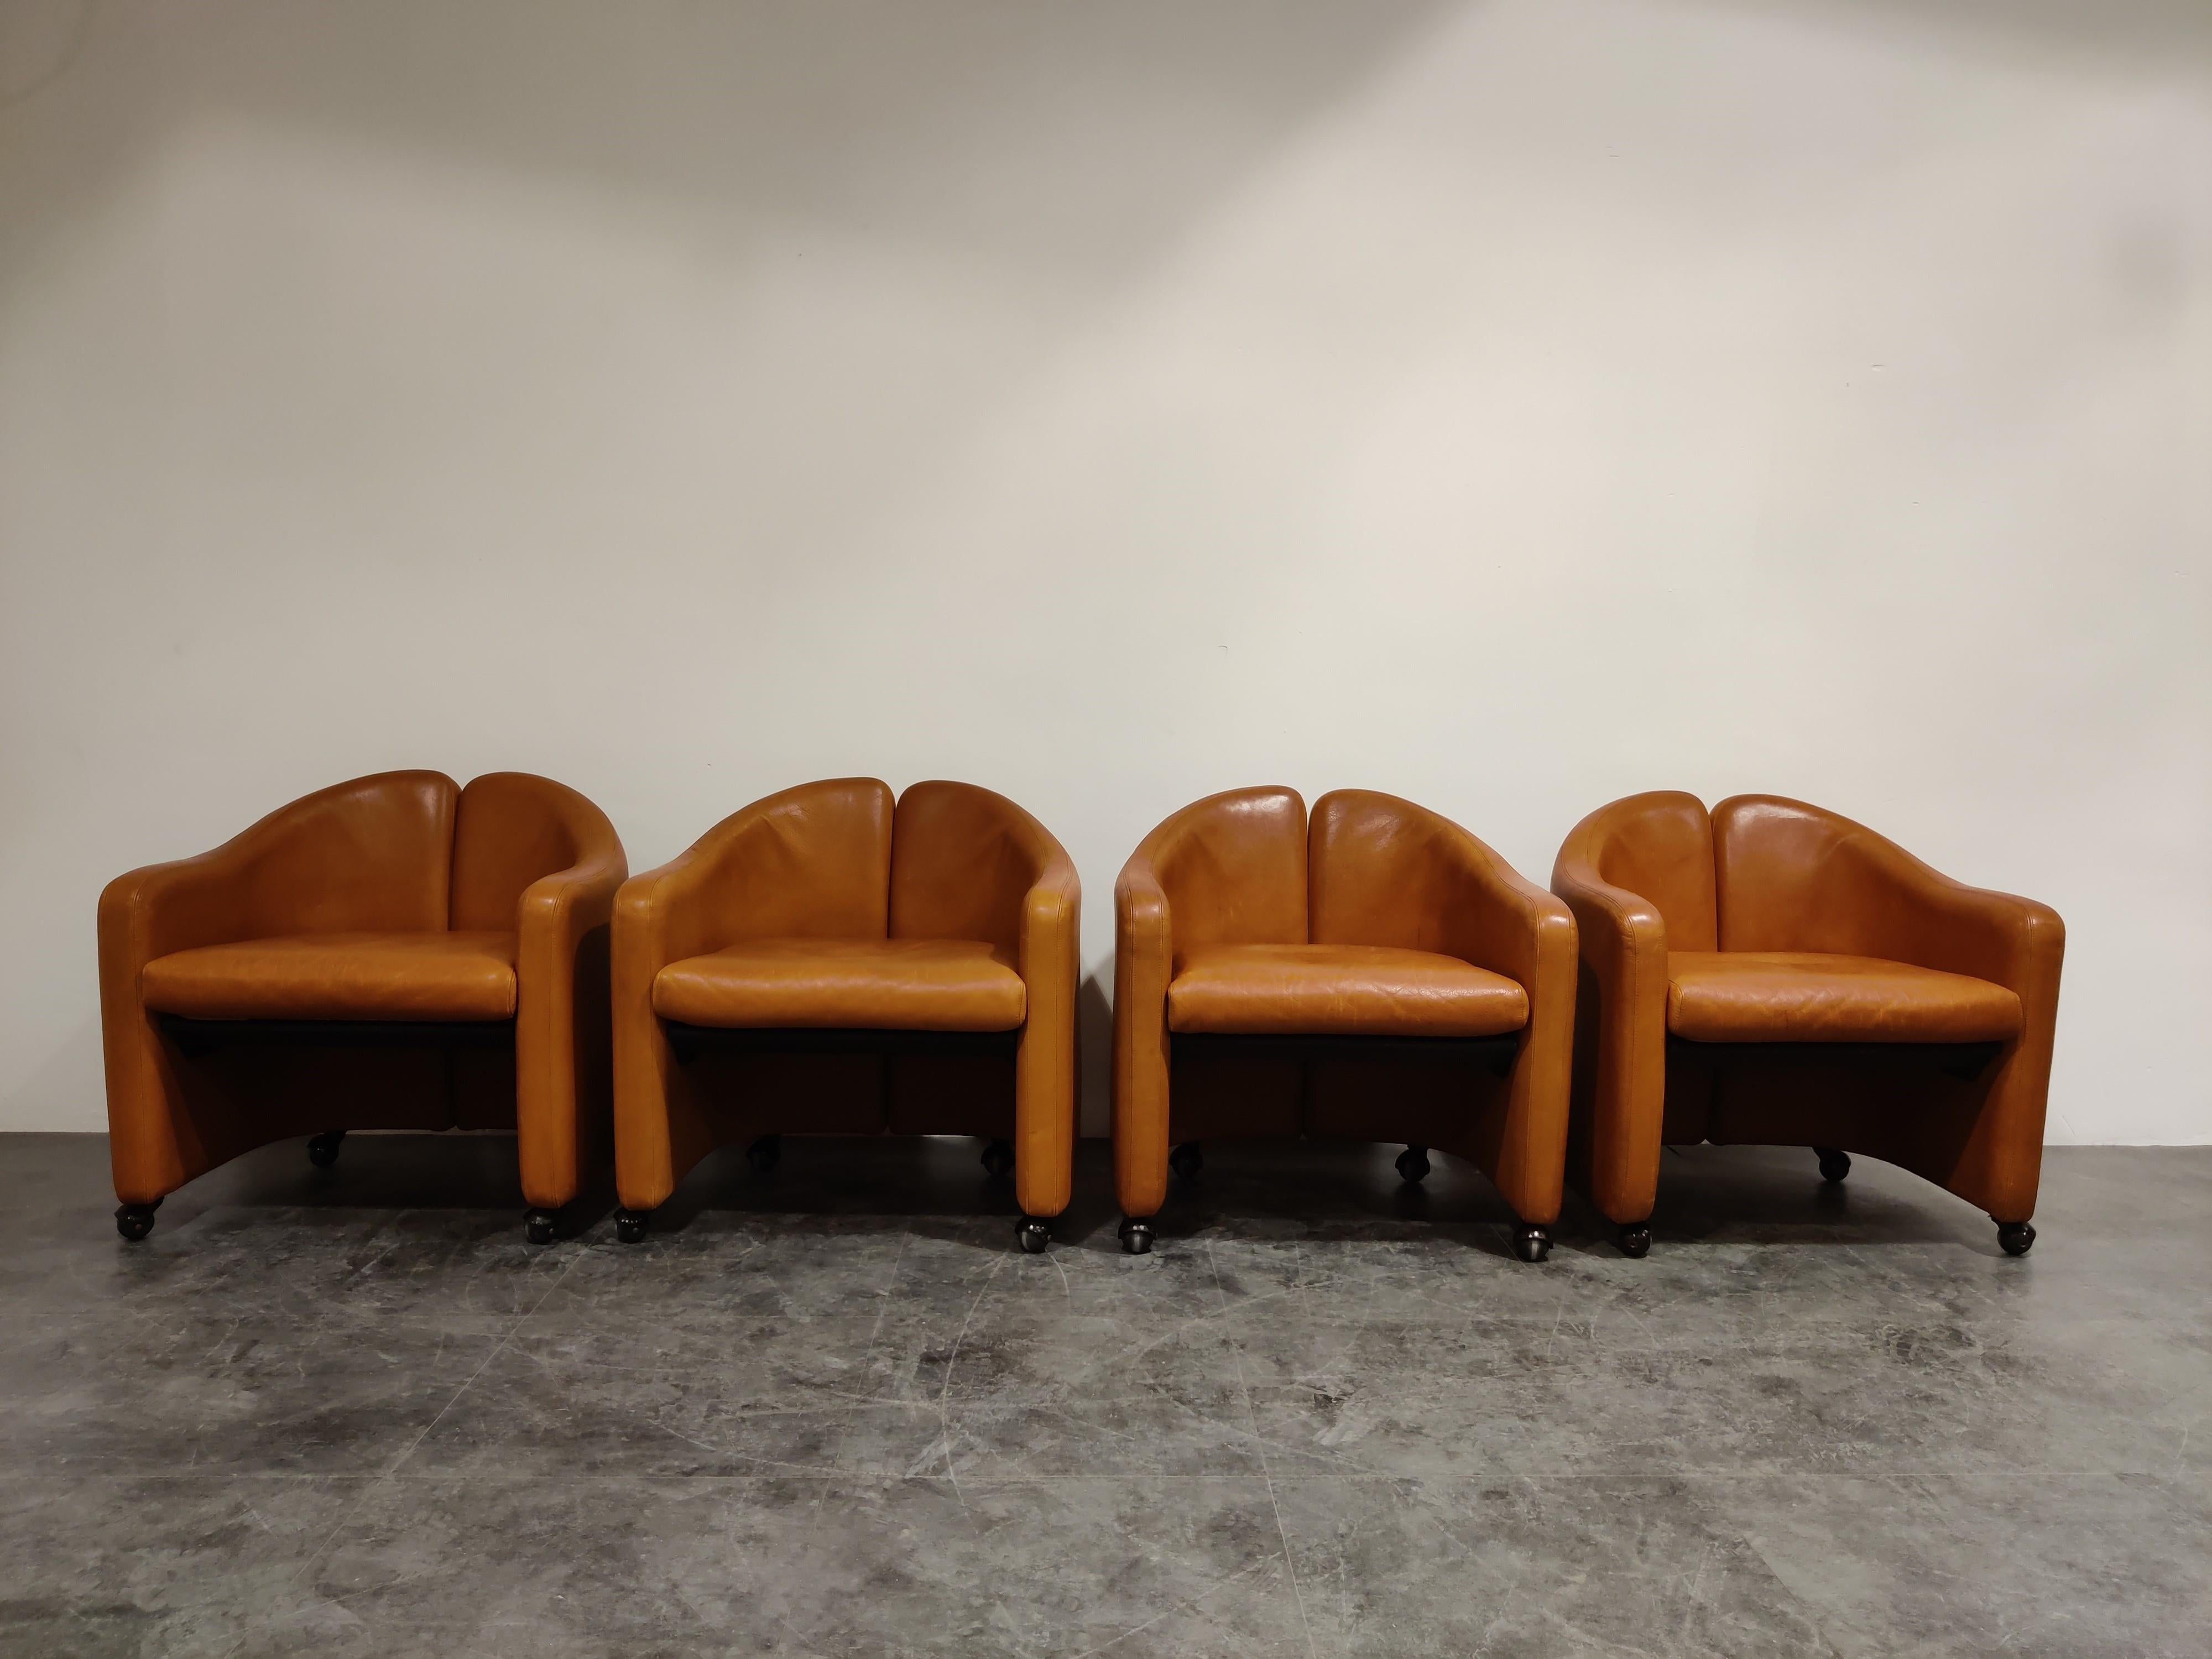 Set of 4 cognac leather easy chairs model PS142 designed by Eugenio Gerlio for Tecno, Italy.

These beautiful 'split back' sit very comfortable.

Good overall condition, age related wear. No rips or cracks. One has a small spot on the seat; not